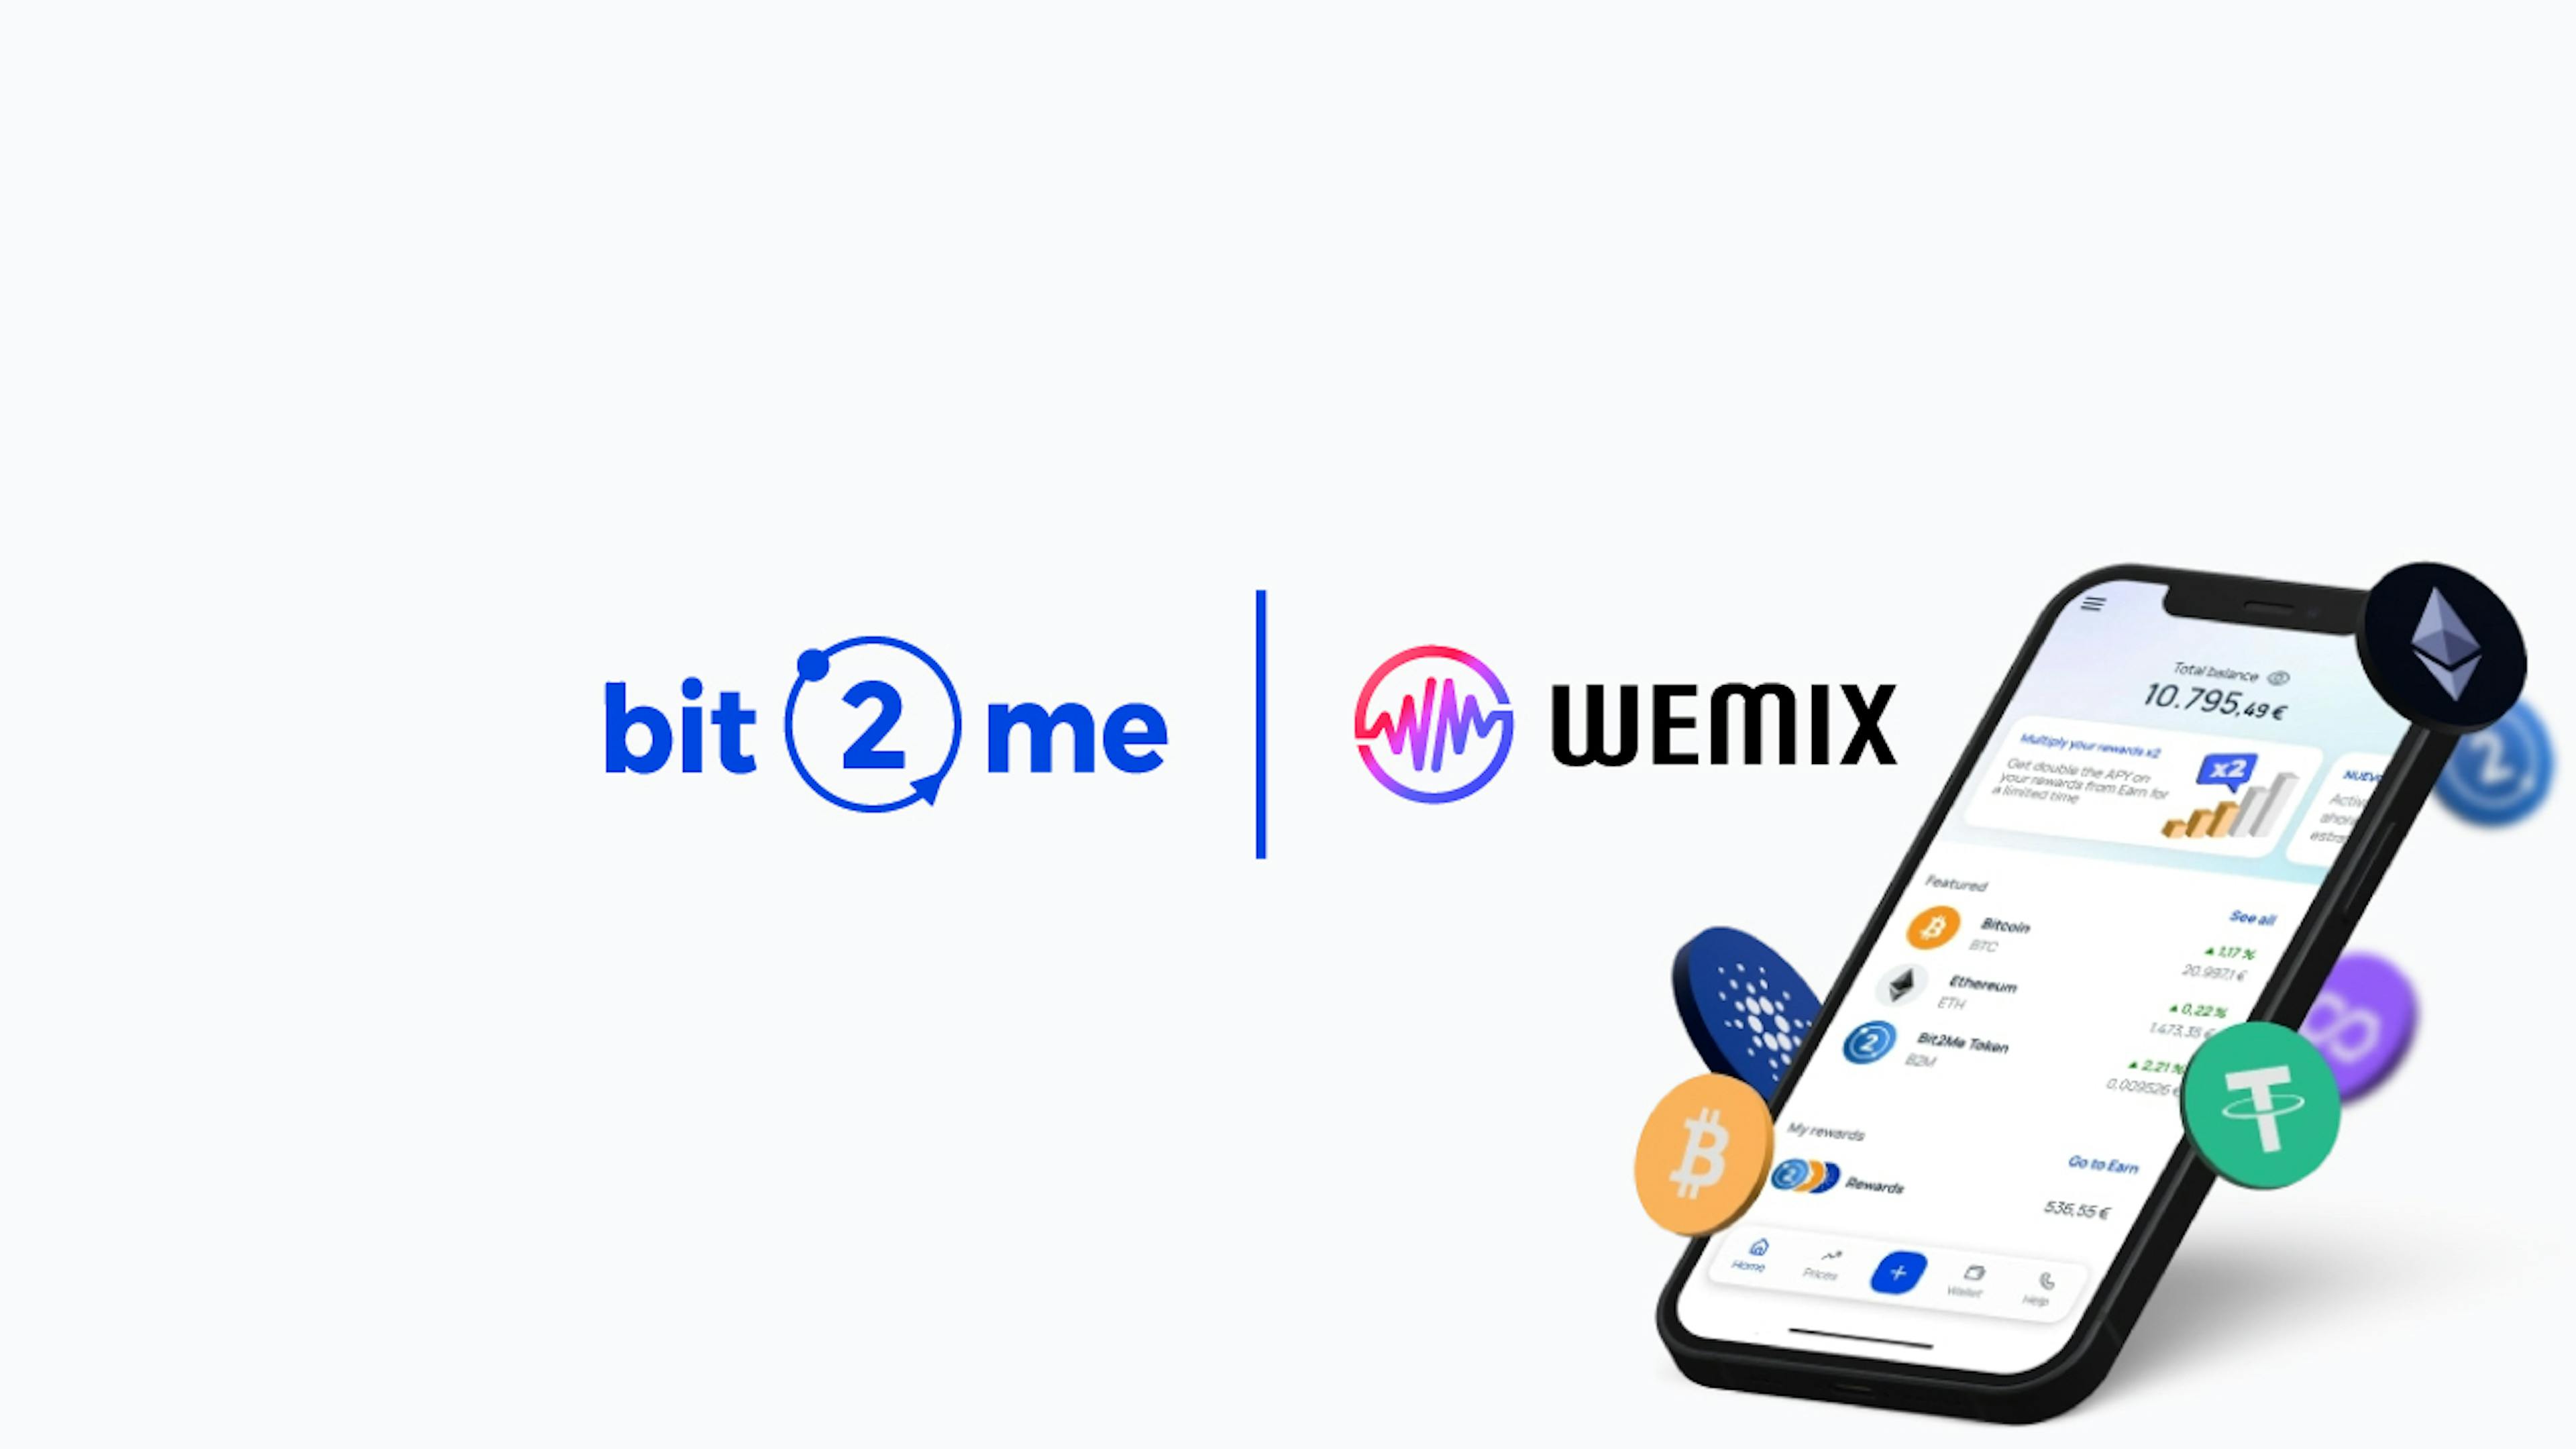 featured image - WEMIX Cryptocurrency Makes European Debut on Spain's Bit2Me Exchange